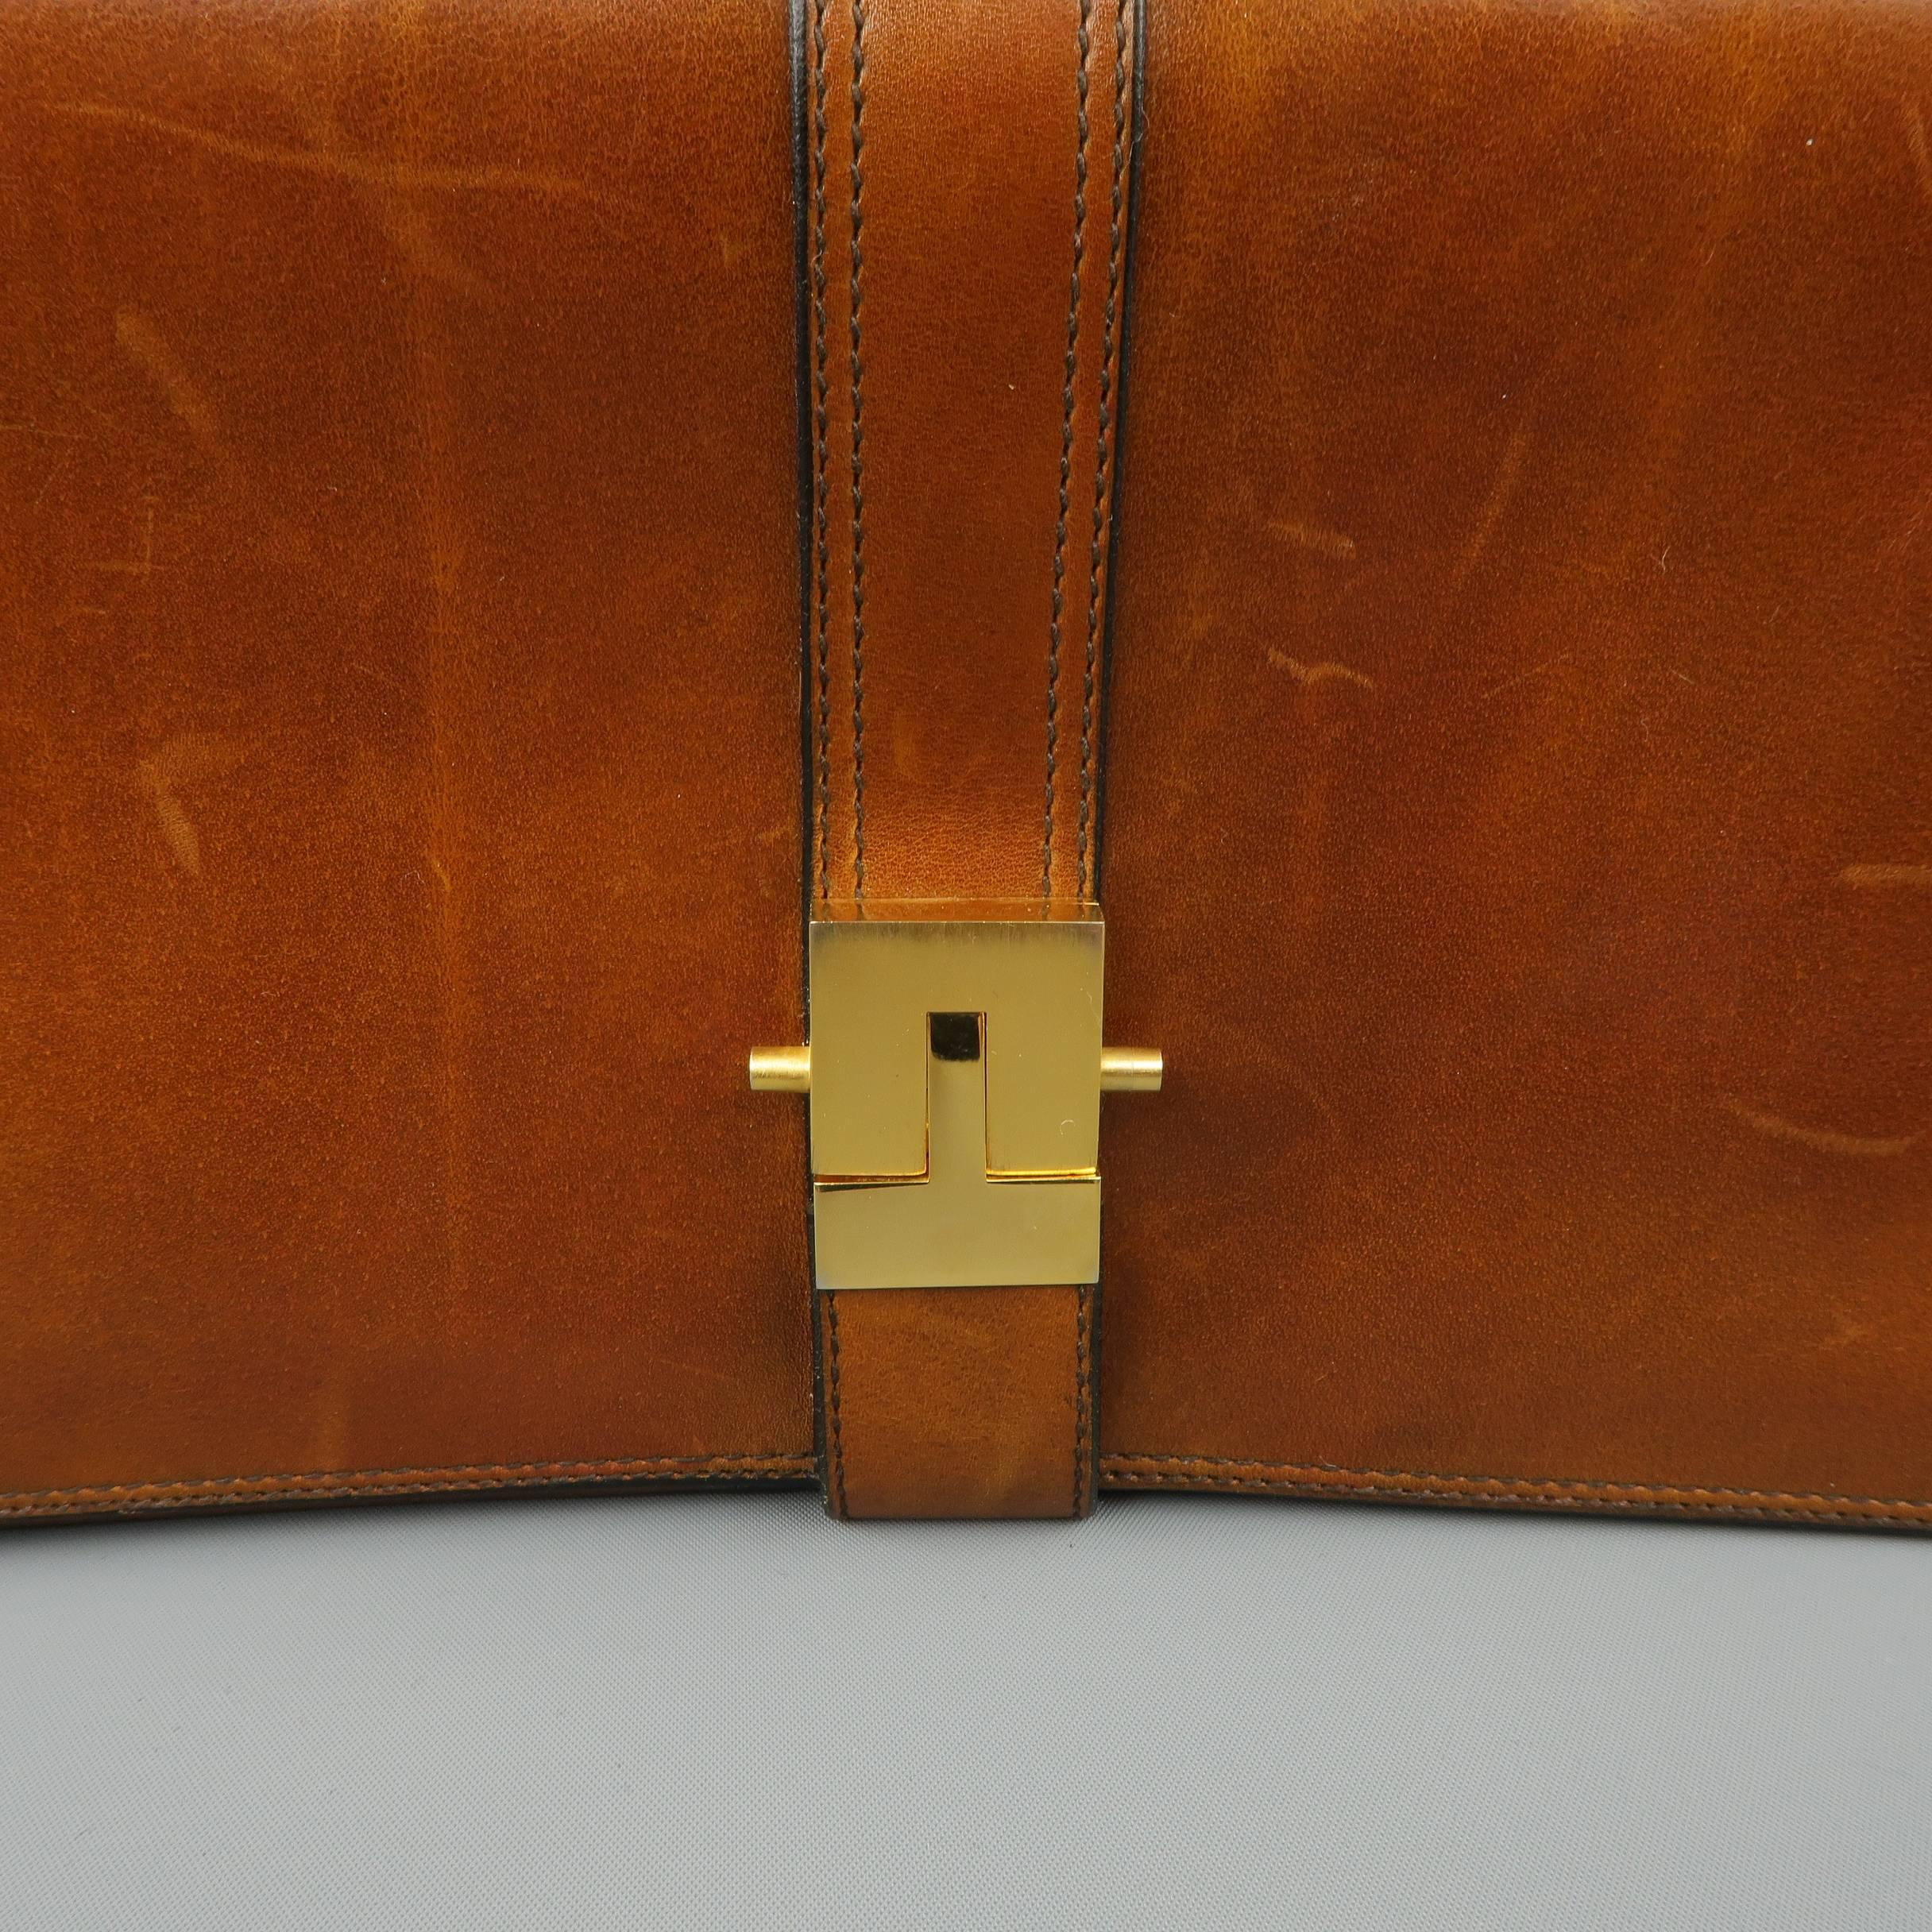 Vintage A.TESTONI for WILKES BASHFORD mini briefcase clutch comes in tan leather with a top flap, gold tone closure, internal storage compartments, and wristlet strap. Wear throughout. As-is. Made in Italy.
 
Fair Pre-Owned Condition.
